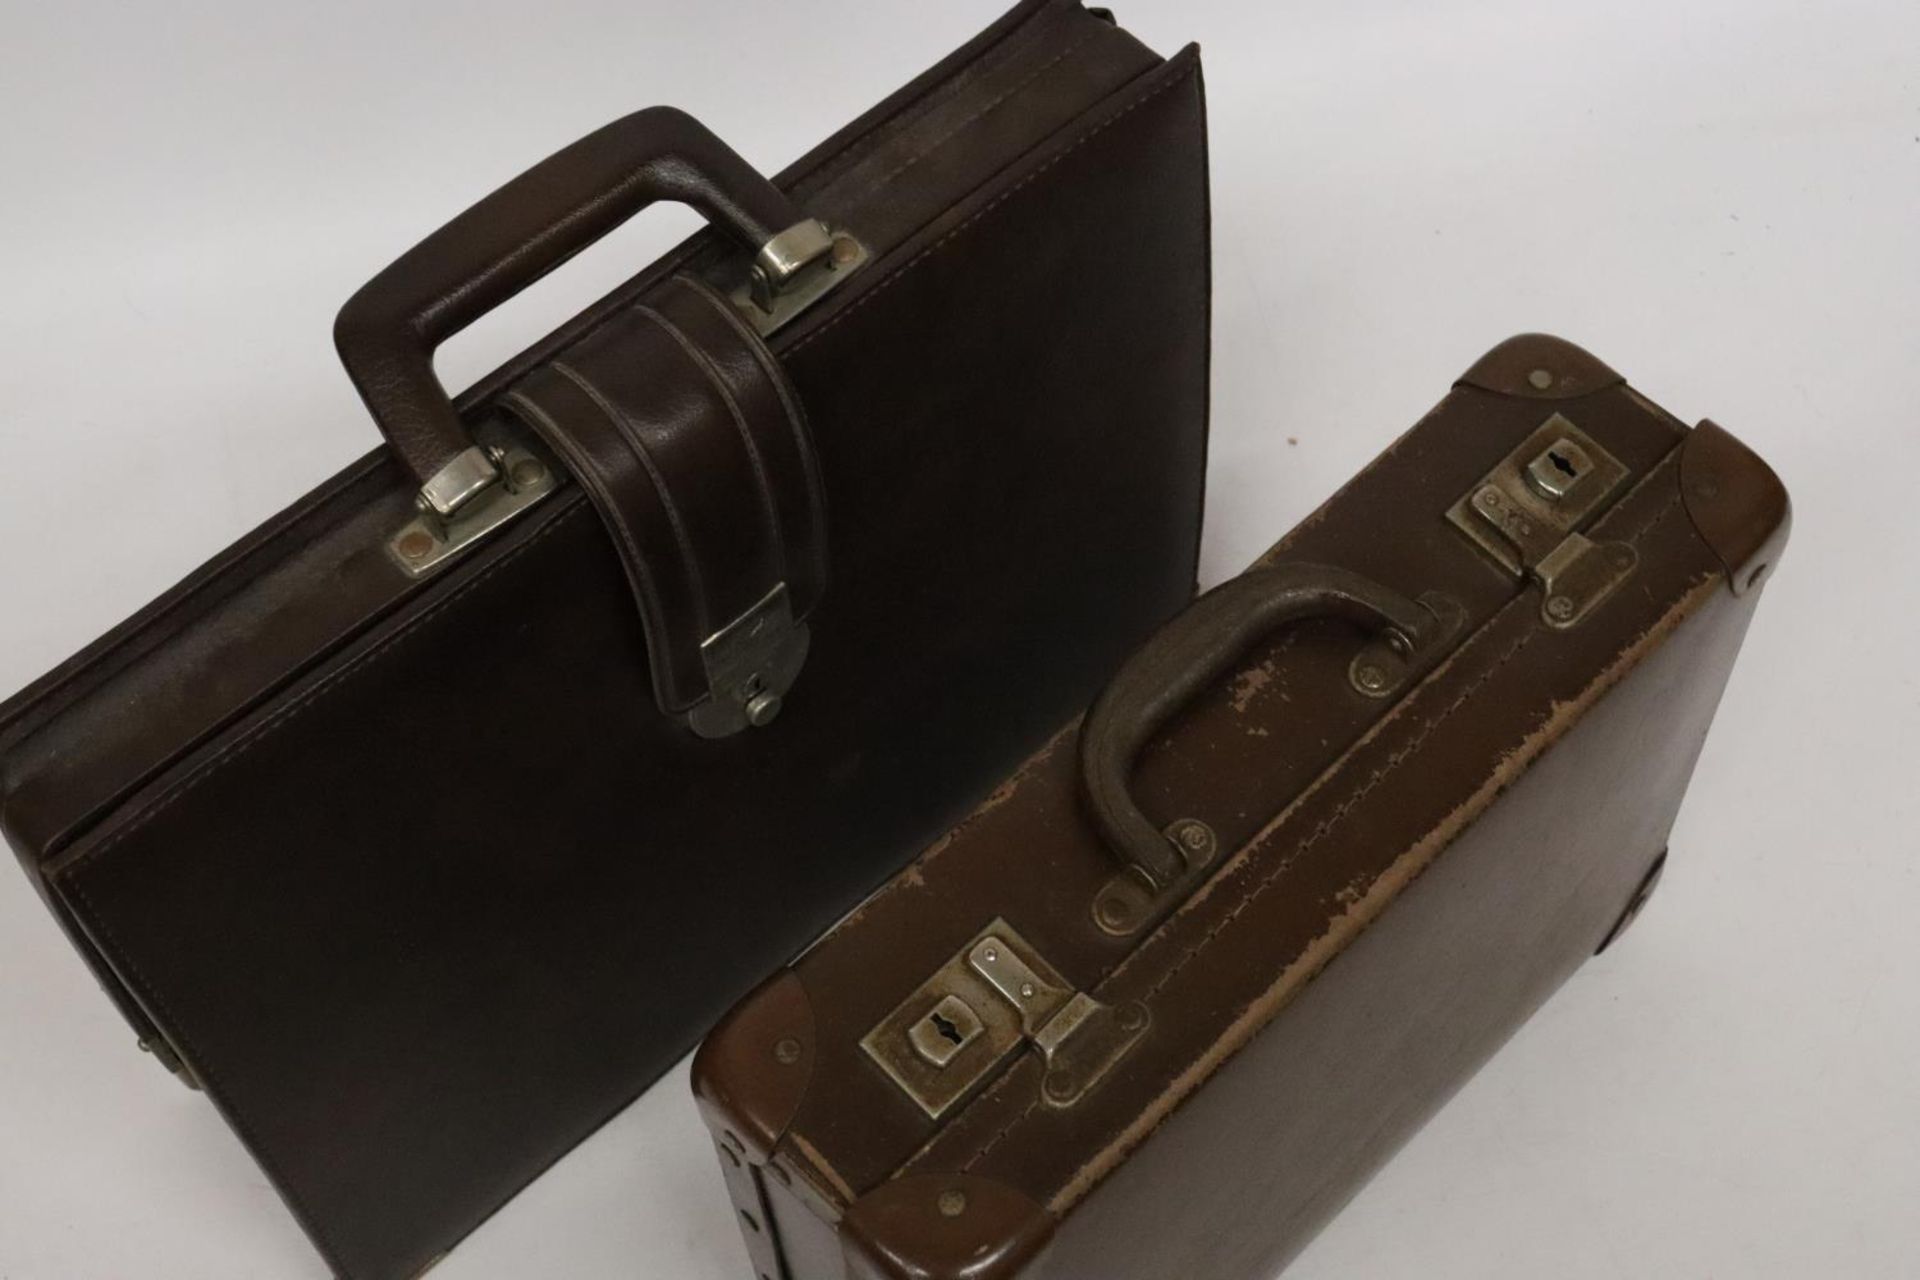 TWO VINTAGE LEATHER BRIEFCASES - Image 6 of 6